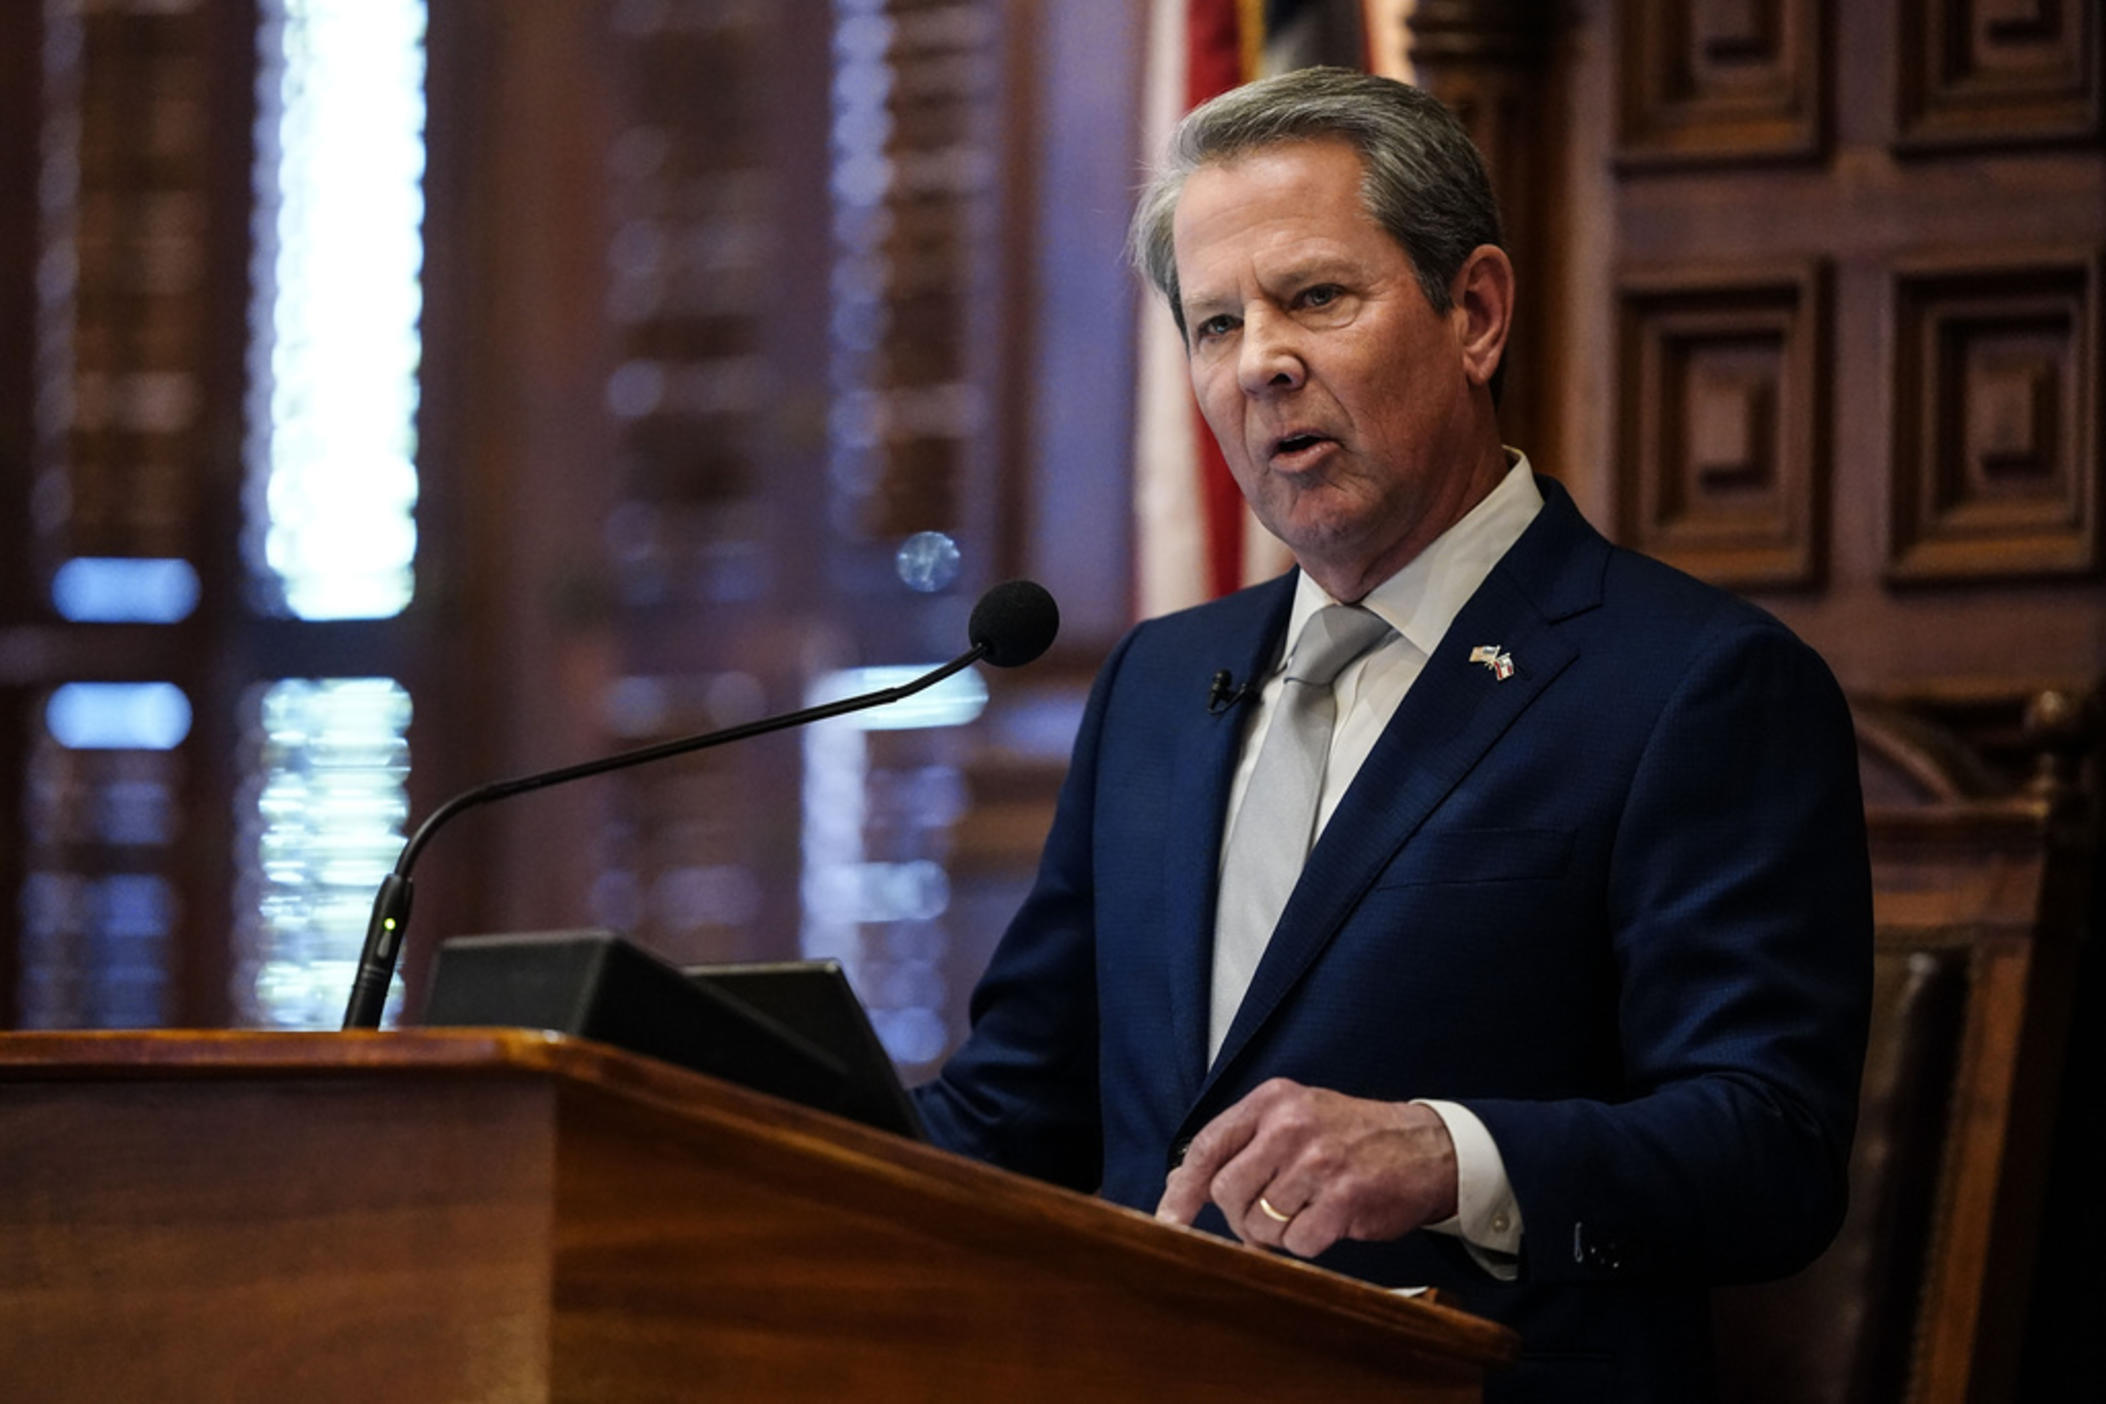 Governor Brian Kemp is shown speaking in the Georgia House of Representatives.